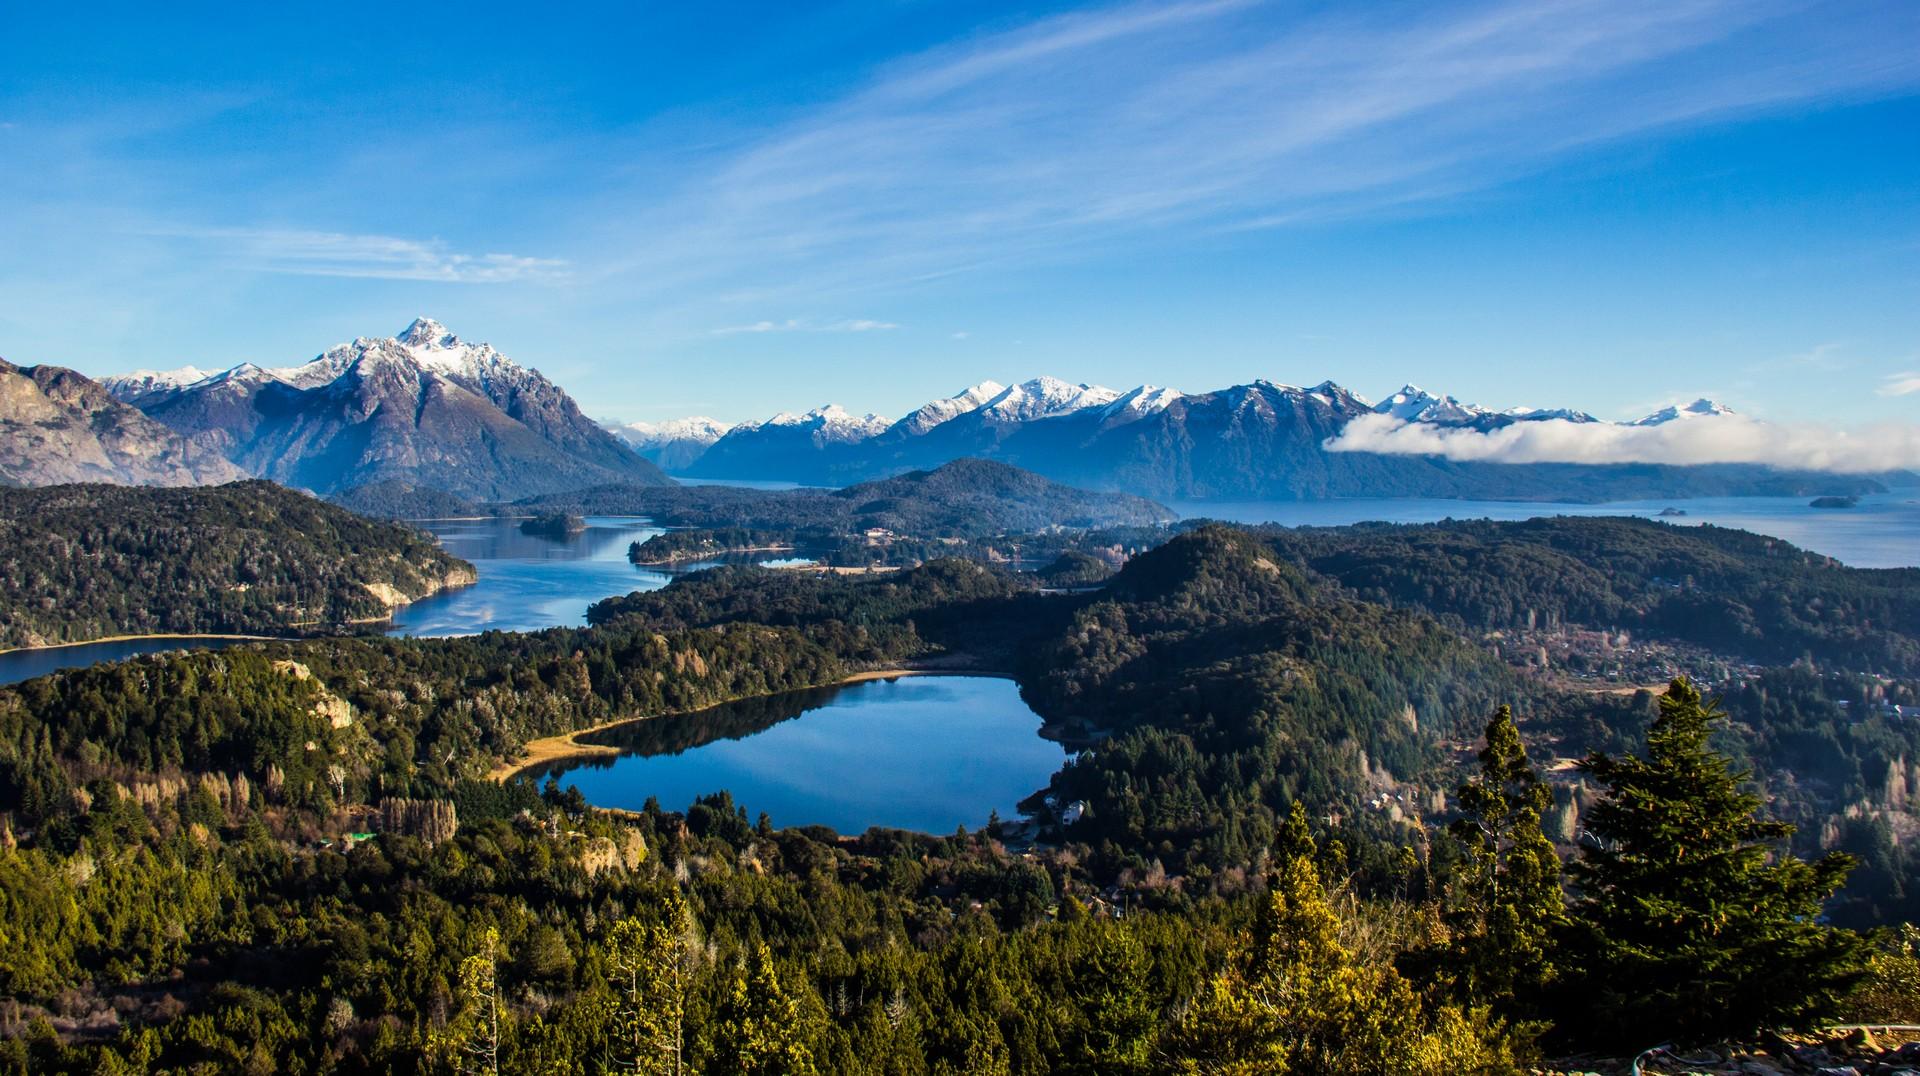 Mountain range in San Carlos de Bariloche on a sunny day with some clouds